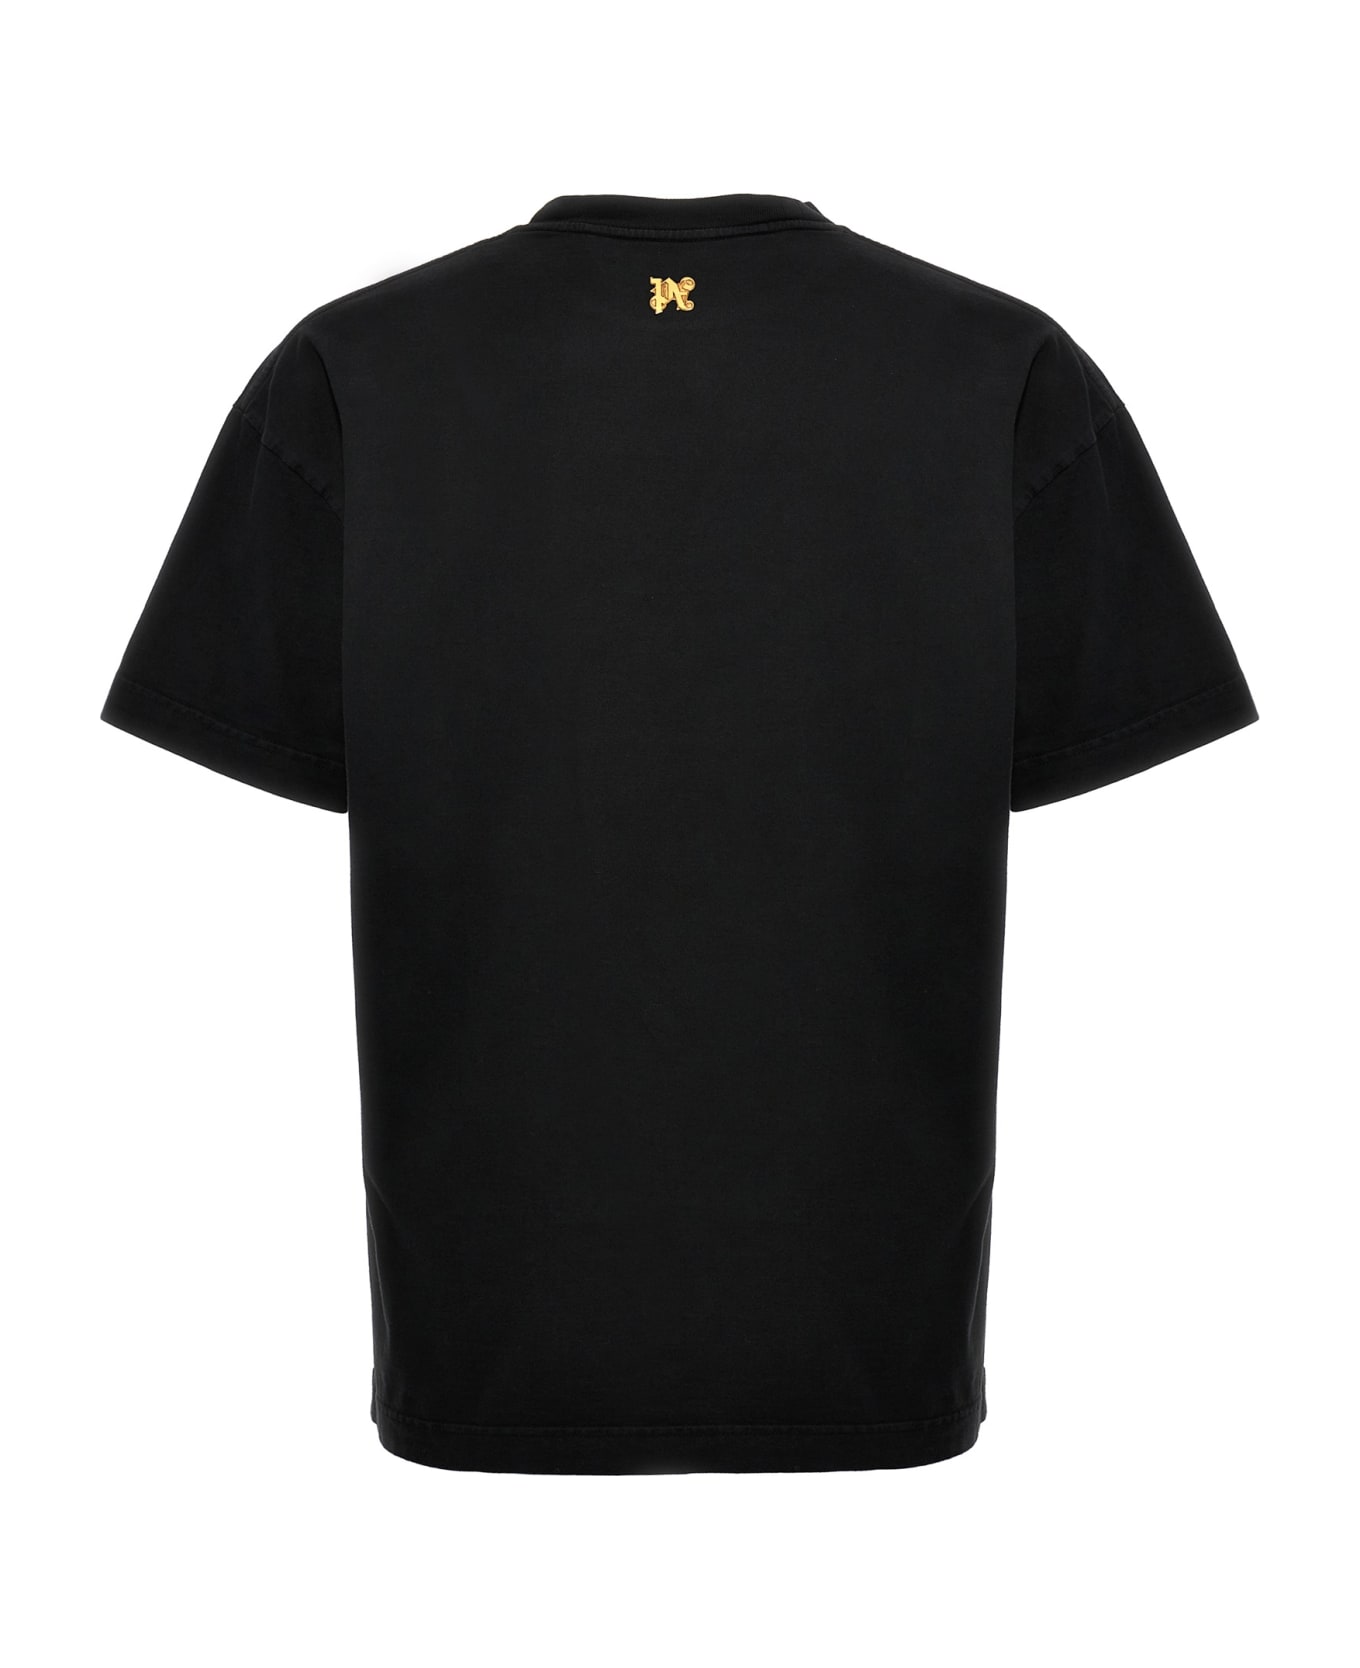 Palm Angels T-shirt With Burining Monogram On The Front - Black gold Tシャツ